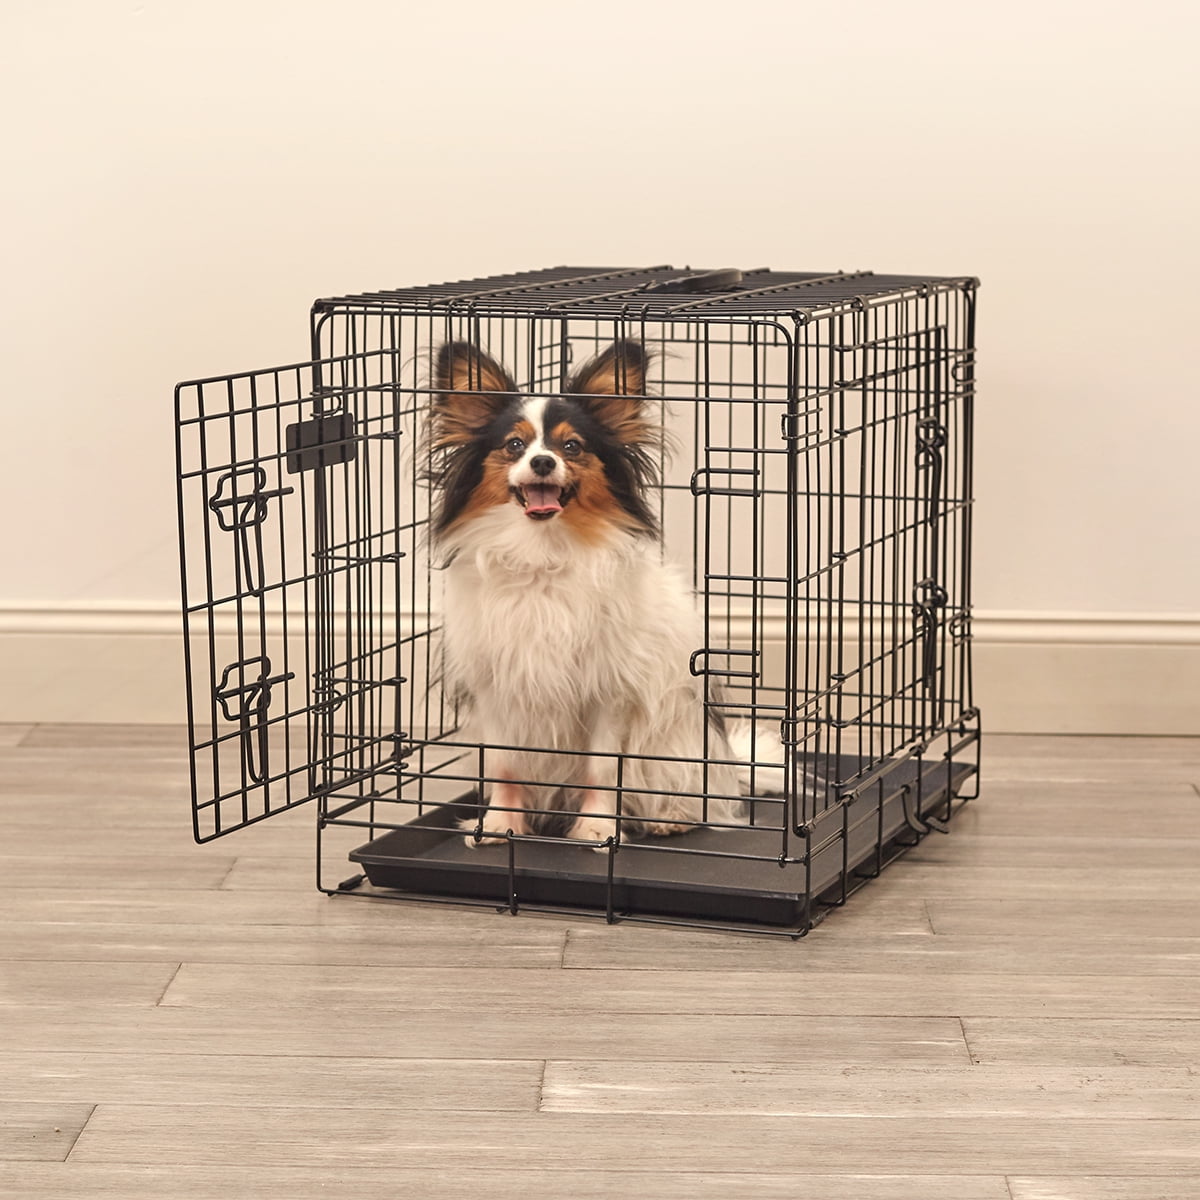 light weight travel dog crate